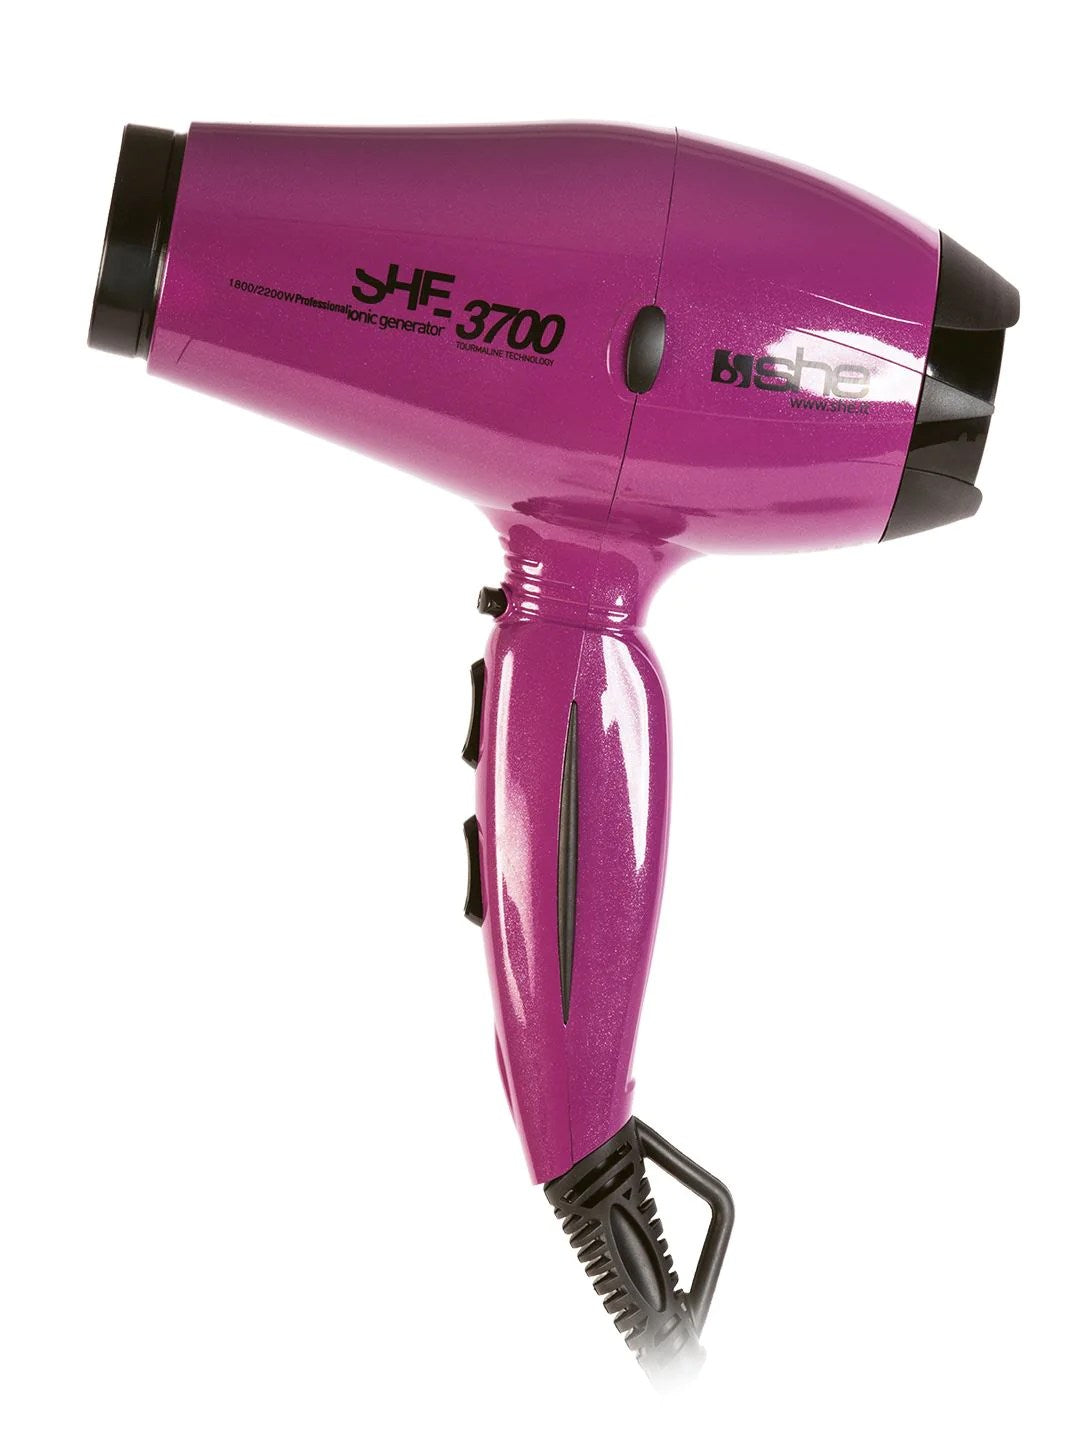 


She is a professional compact hairdryer 3700 Ionic 2200 W, purple color.